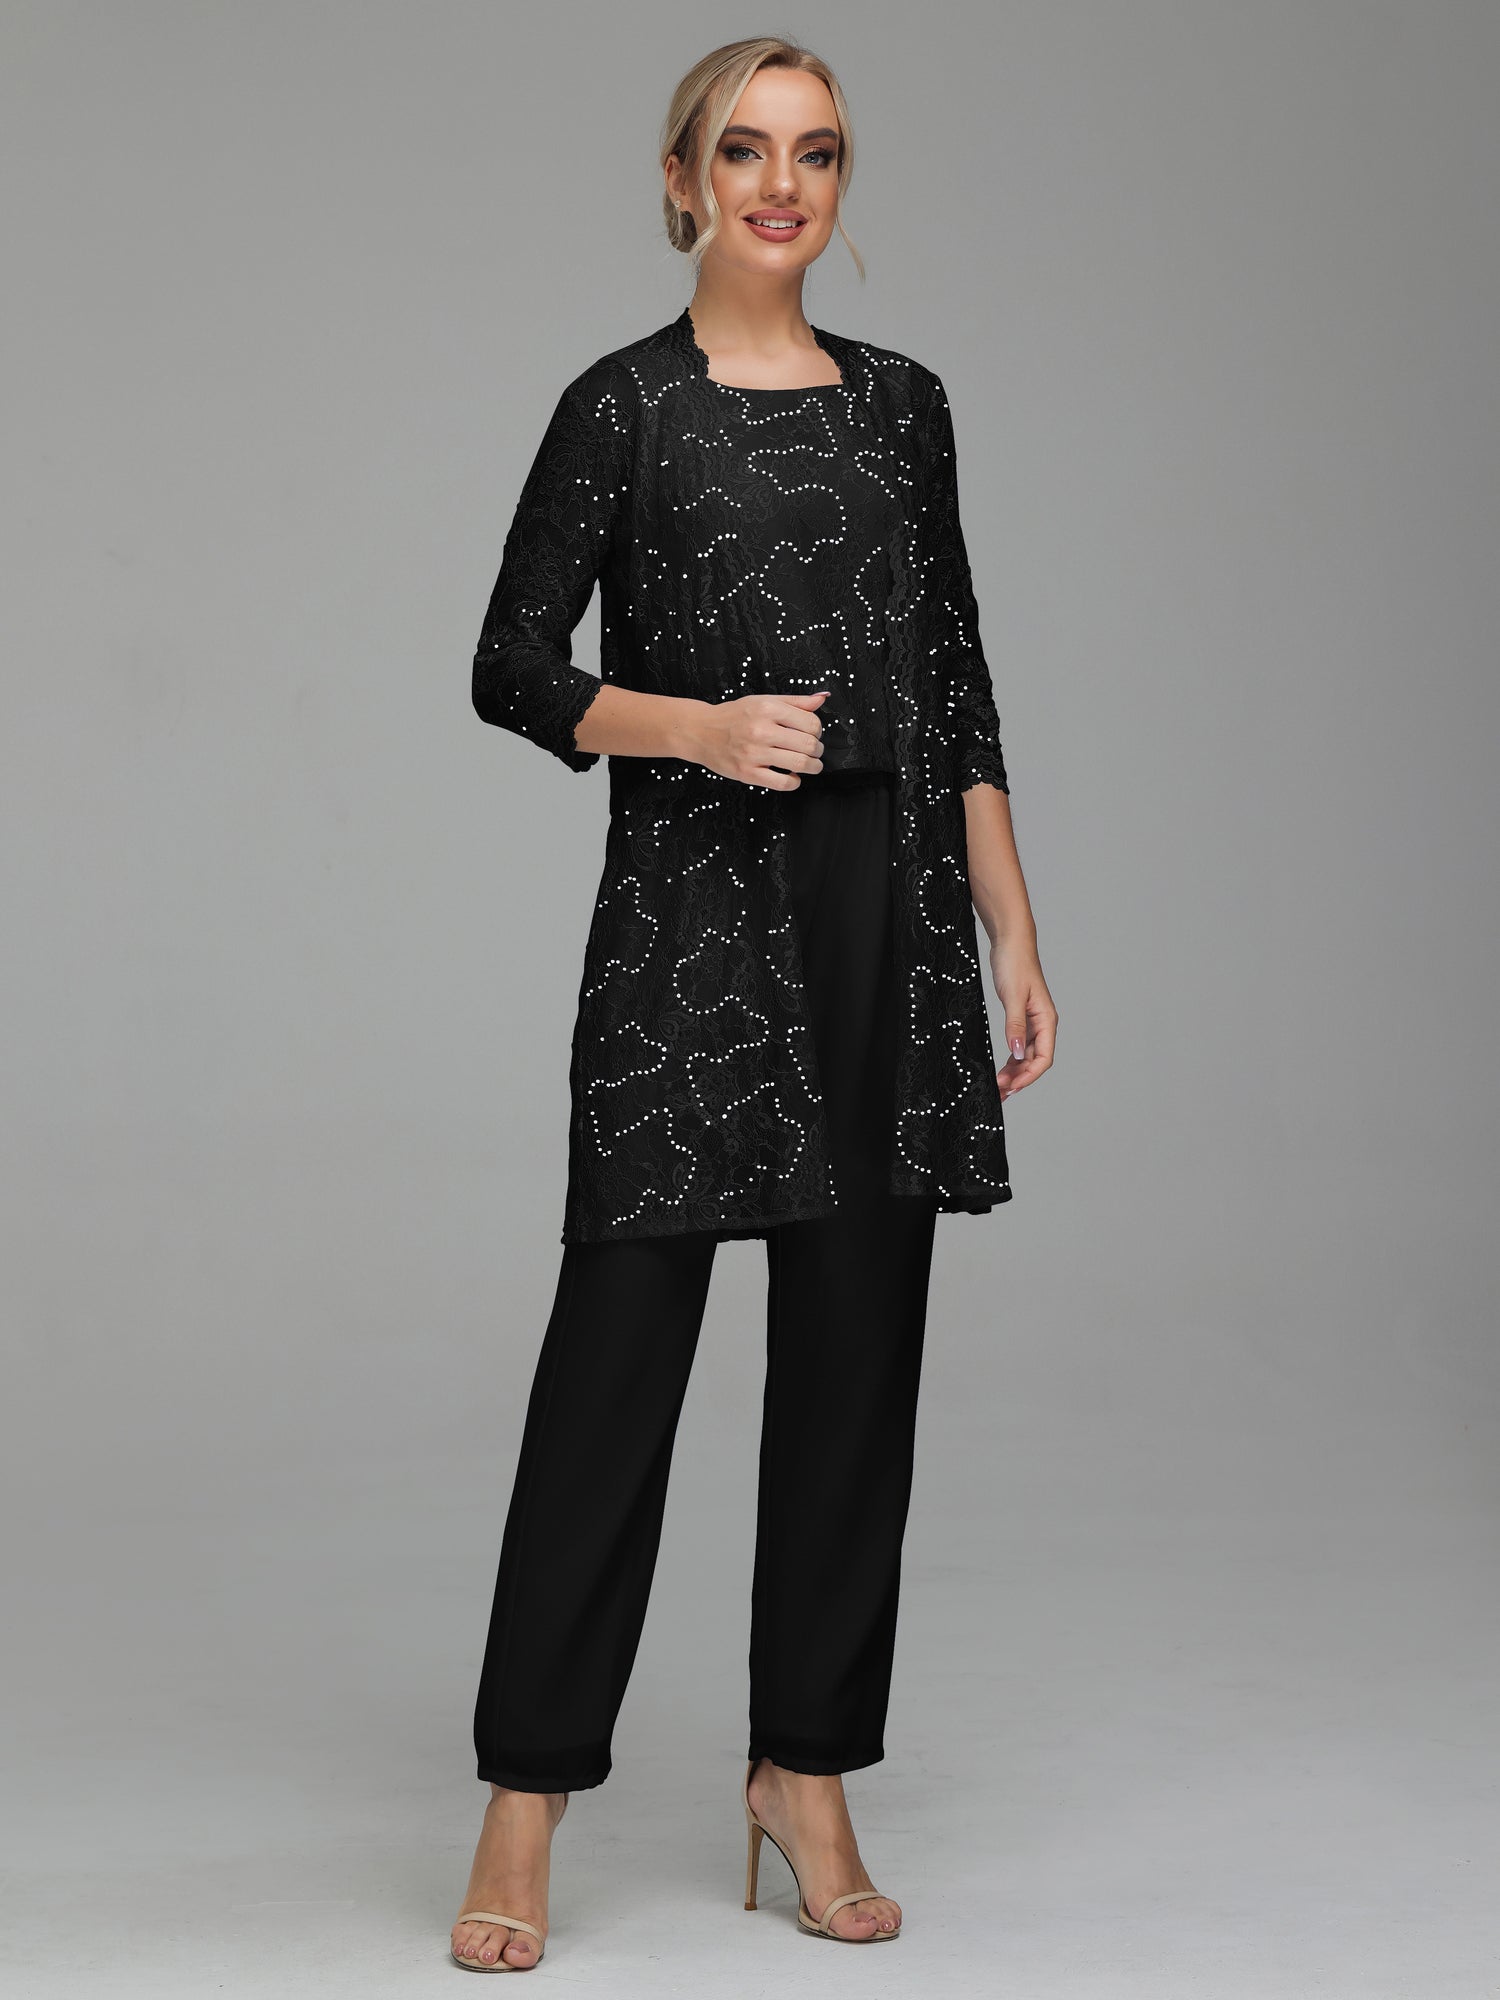 New Elegant Pant Suits Straps Long Chiffon Lace Mother Of The